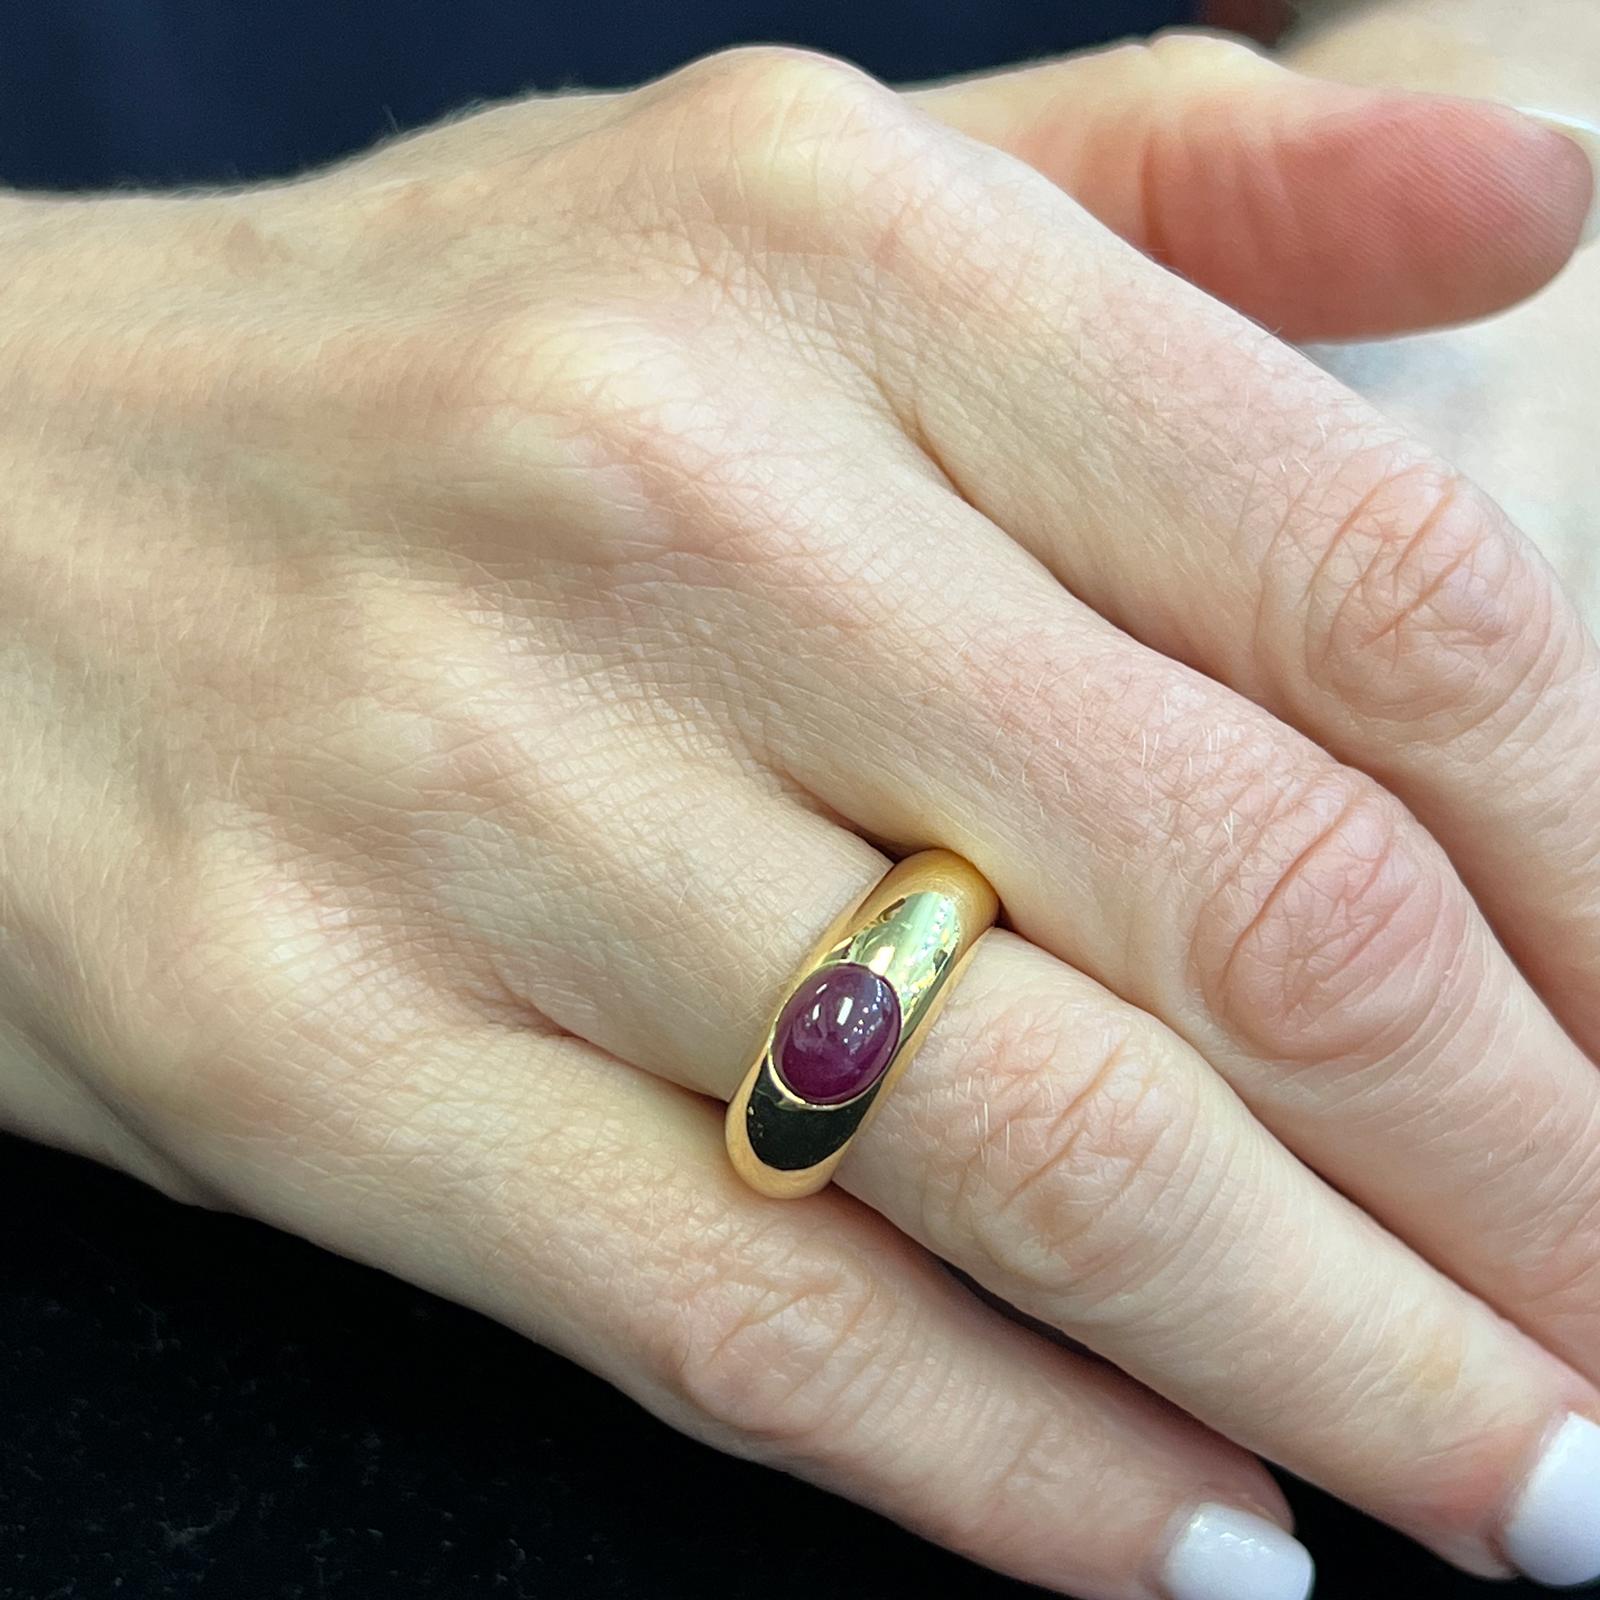 Cabochon ruby band ring handcrafted in 18 karat yellow gold. The ring features a natural ruby gemstone weighing approximately 1.50 carats. The bezel set ruby is set in a contemporary rounded gold band measuring 7.6mm in width. The ring is currently